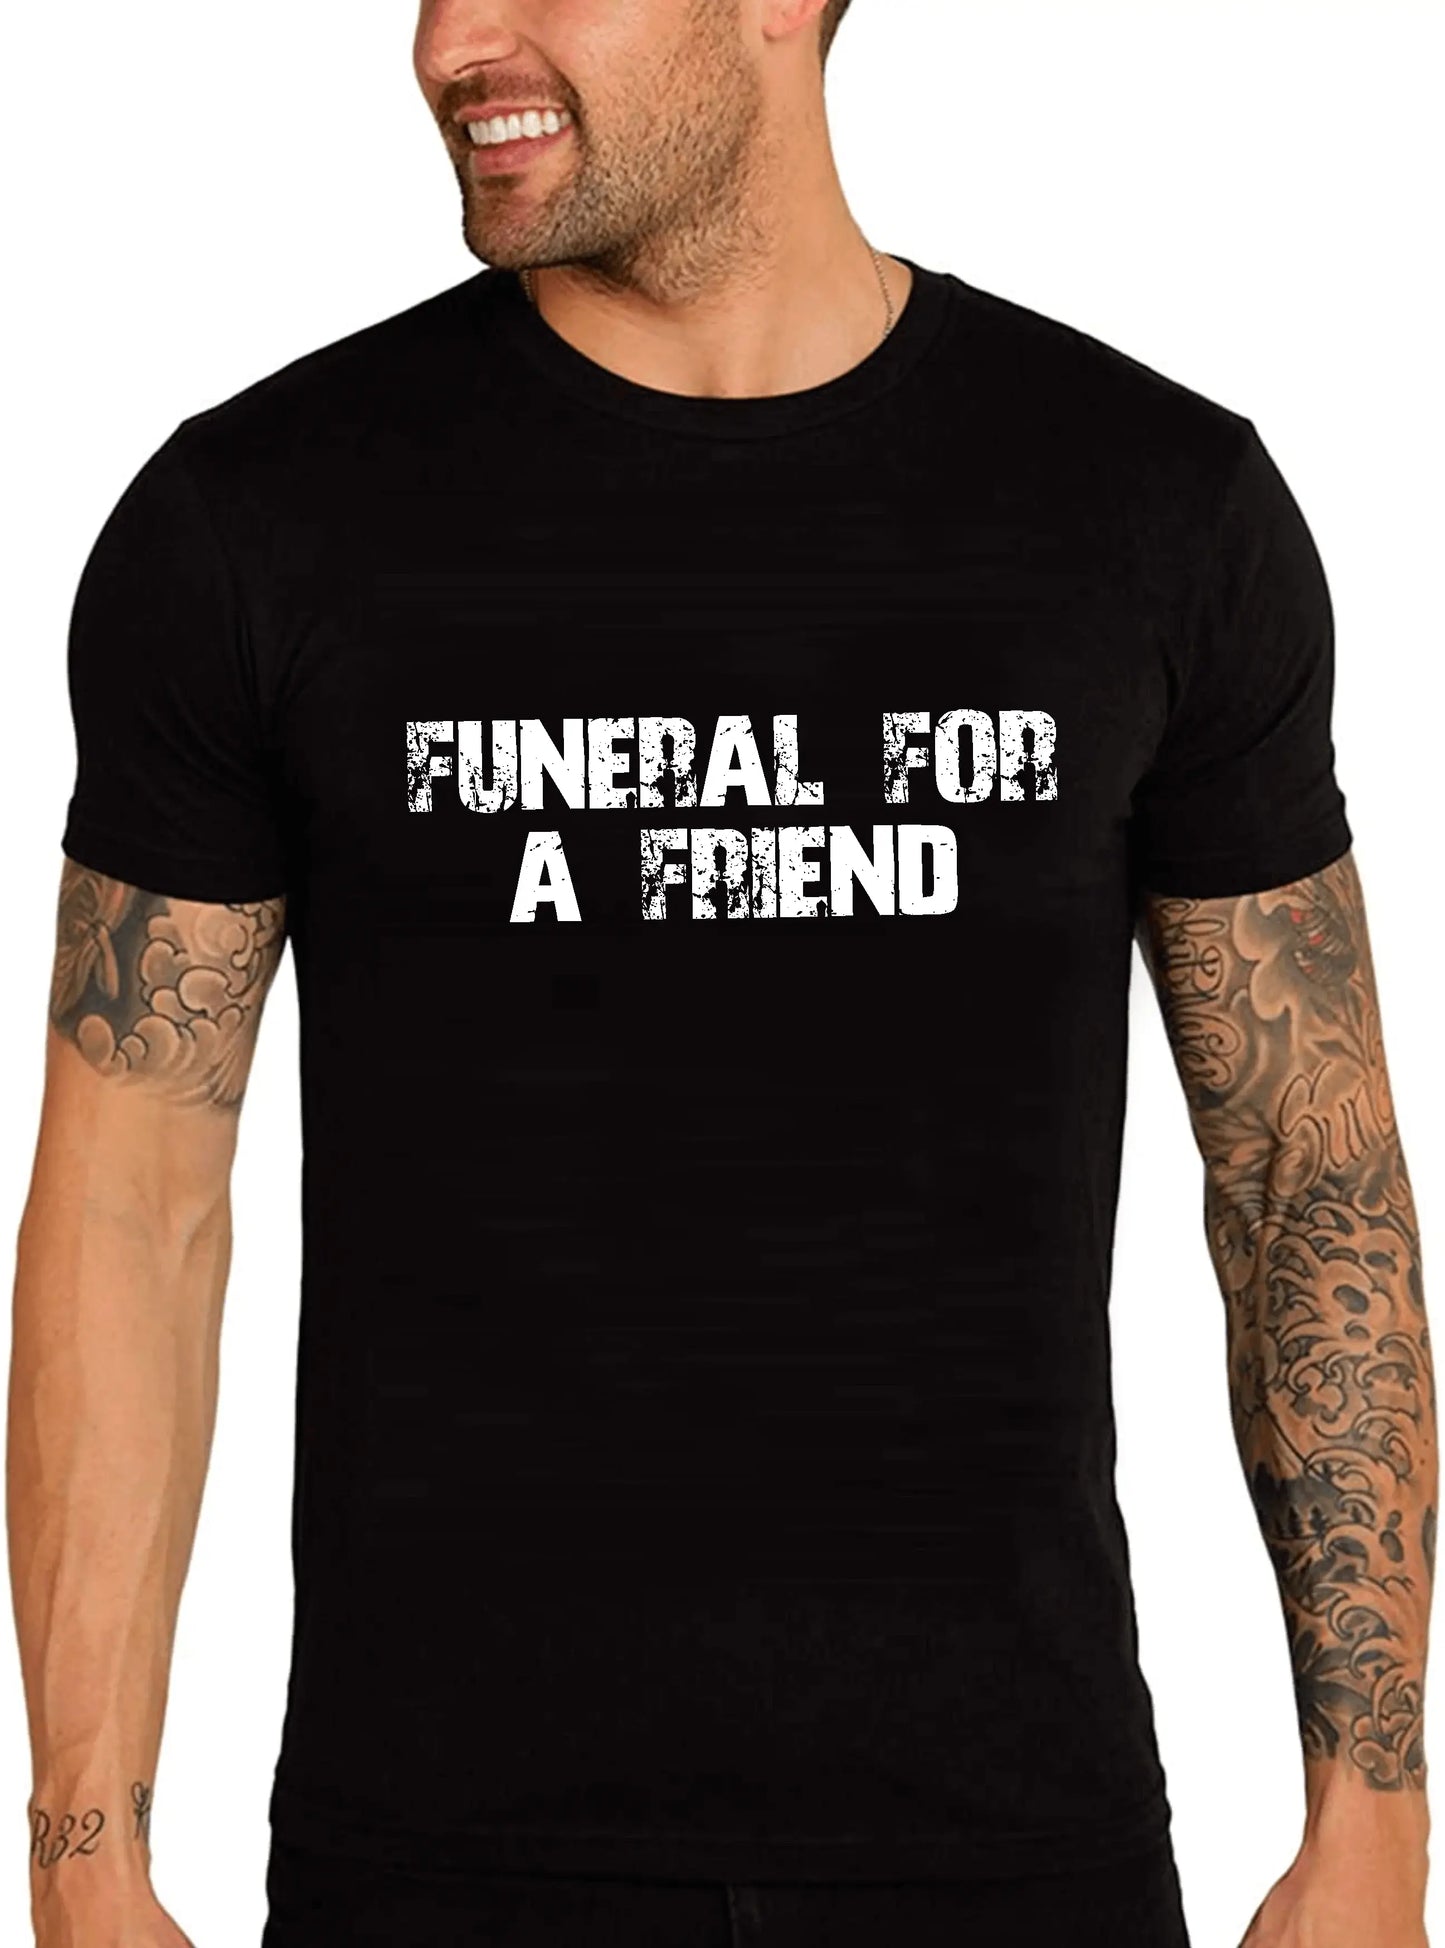 Men's Graphic T-Shirt Funeral For A Friend Eco-Friendly Limited Edition Short Sleeve Tee-Shirt Vintage Birthday Gift Novelty